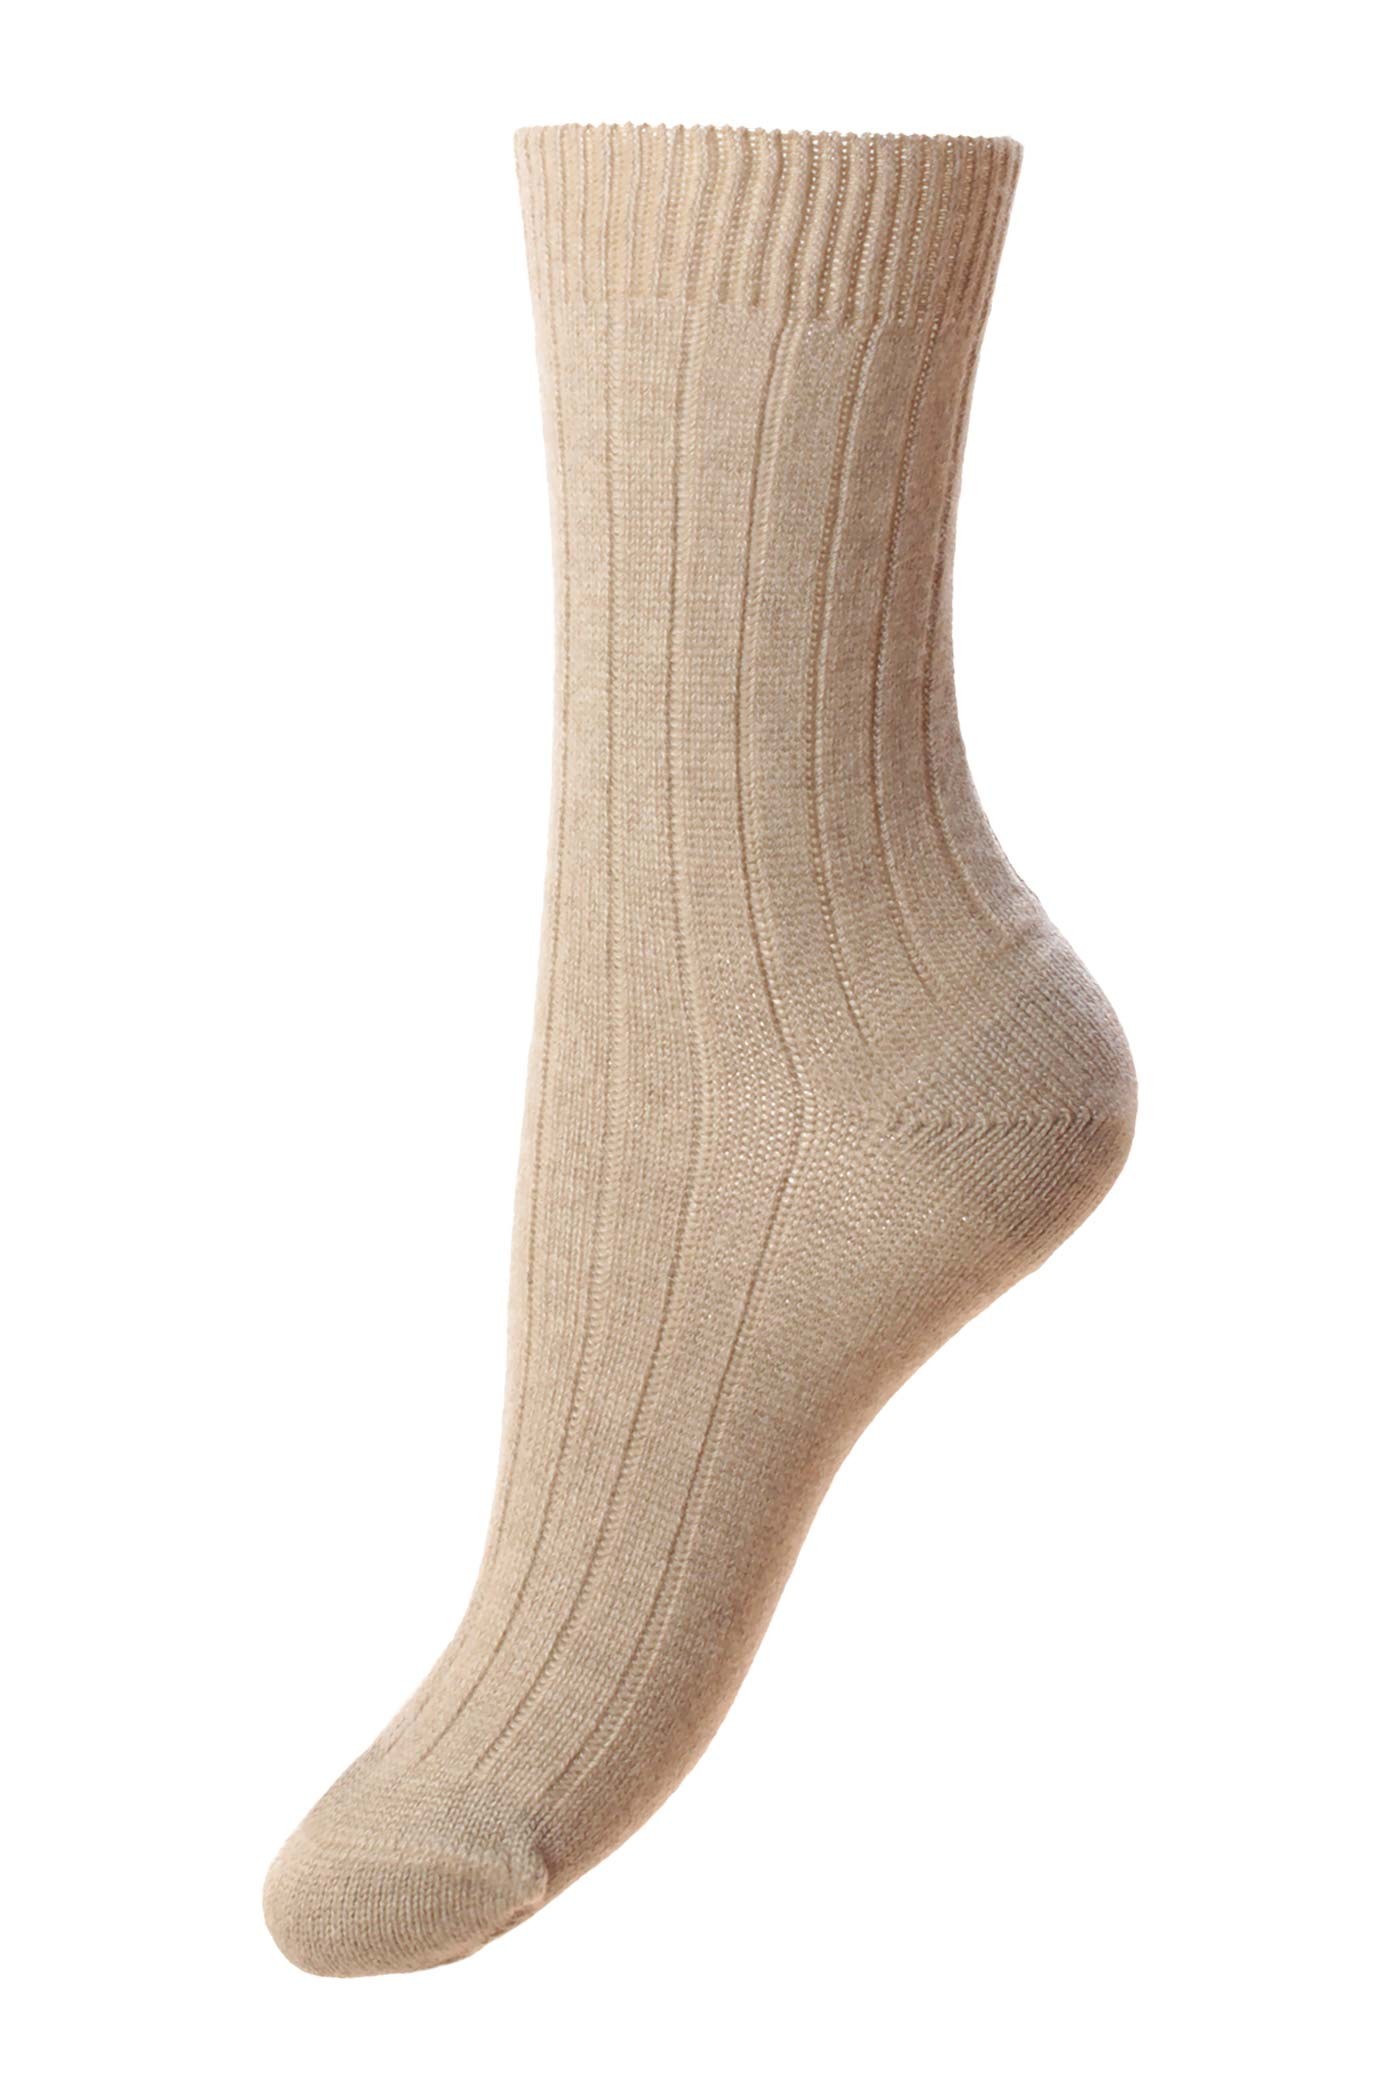 Pantherella Women's Tabitha Cashmere Ribbed Anklet Socks in Natural